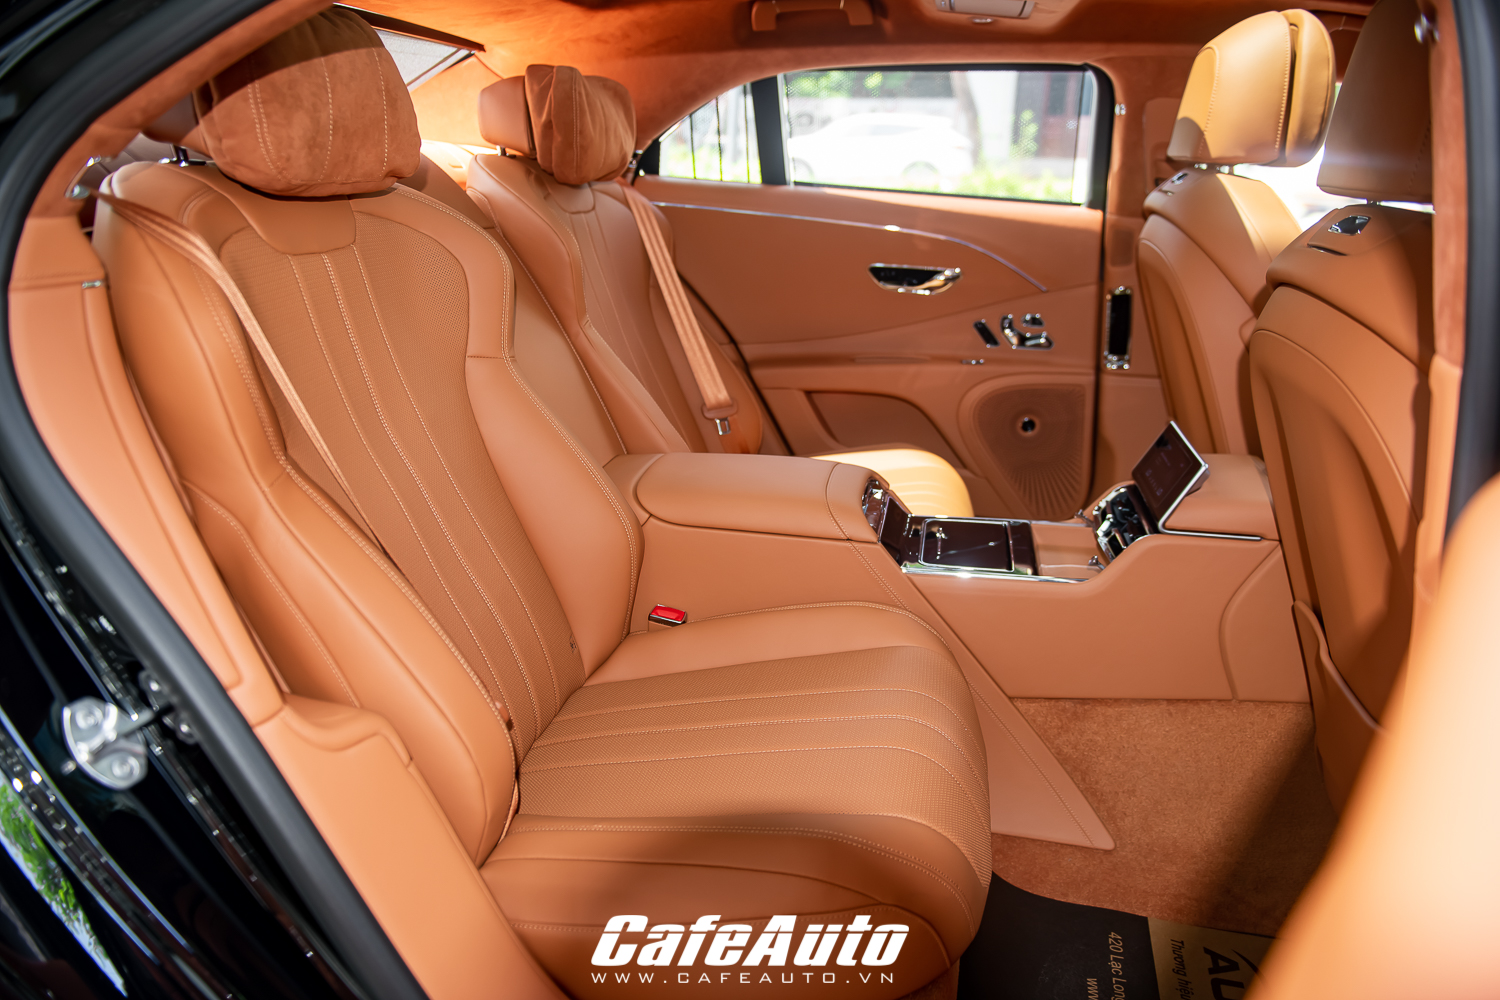 doan-di-bang-mua-bentley-flying-spur-20-ty-cafeautovn-8